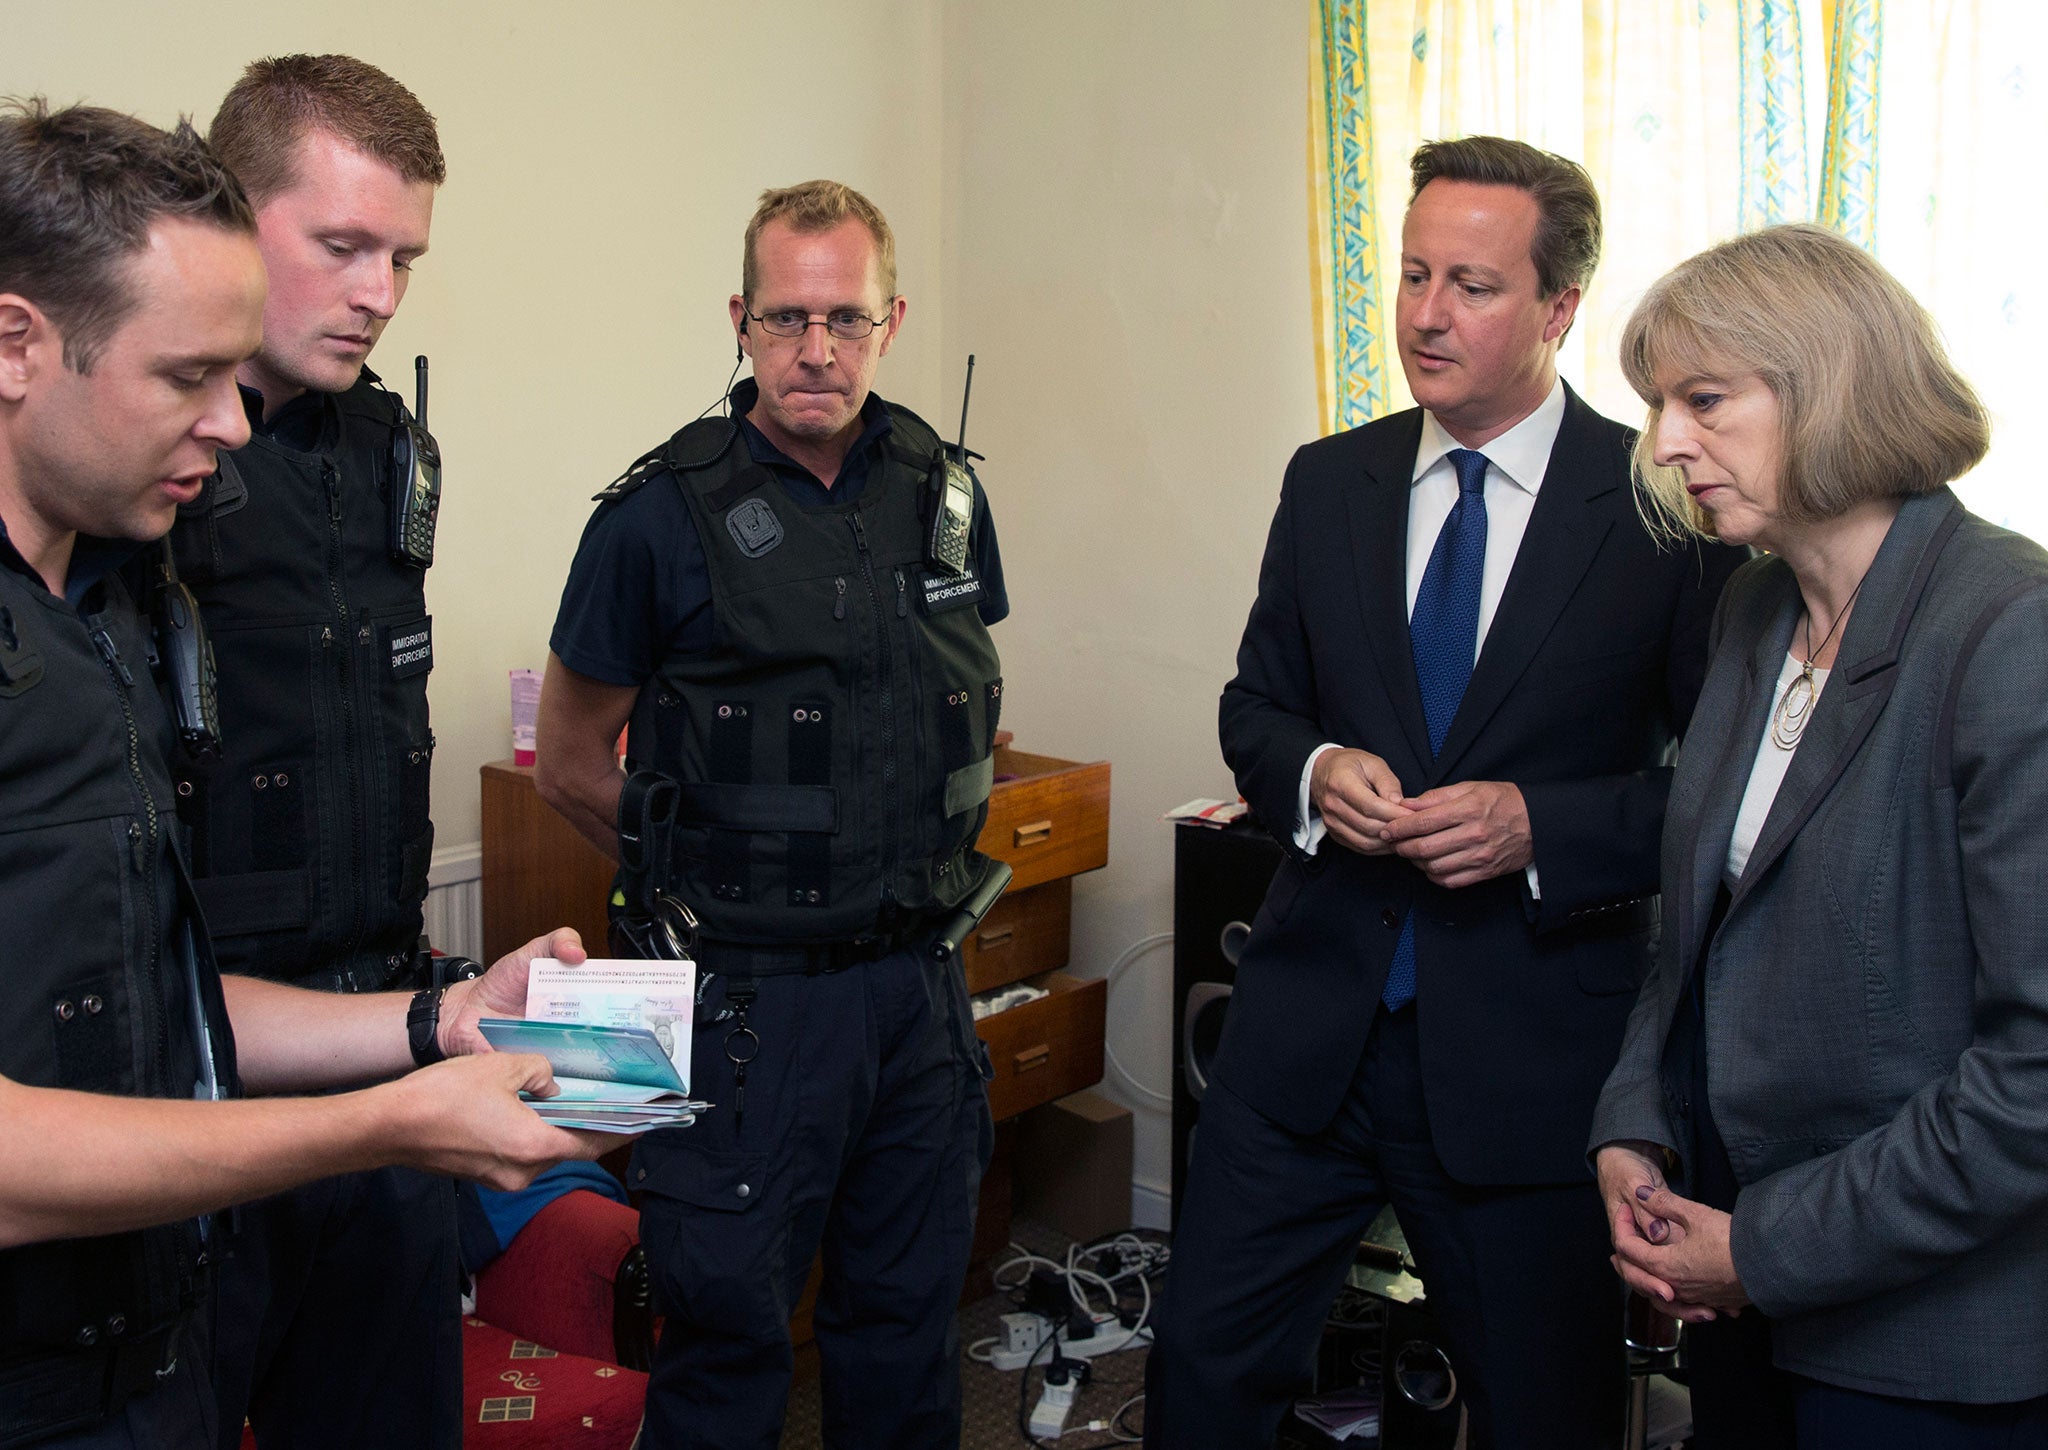 David Cameron and Theresa Mayspeak to Immigration Enforcement officers at a property where six immigrants were arrested on July 29, 2014 in Slough, England.